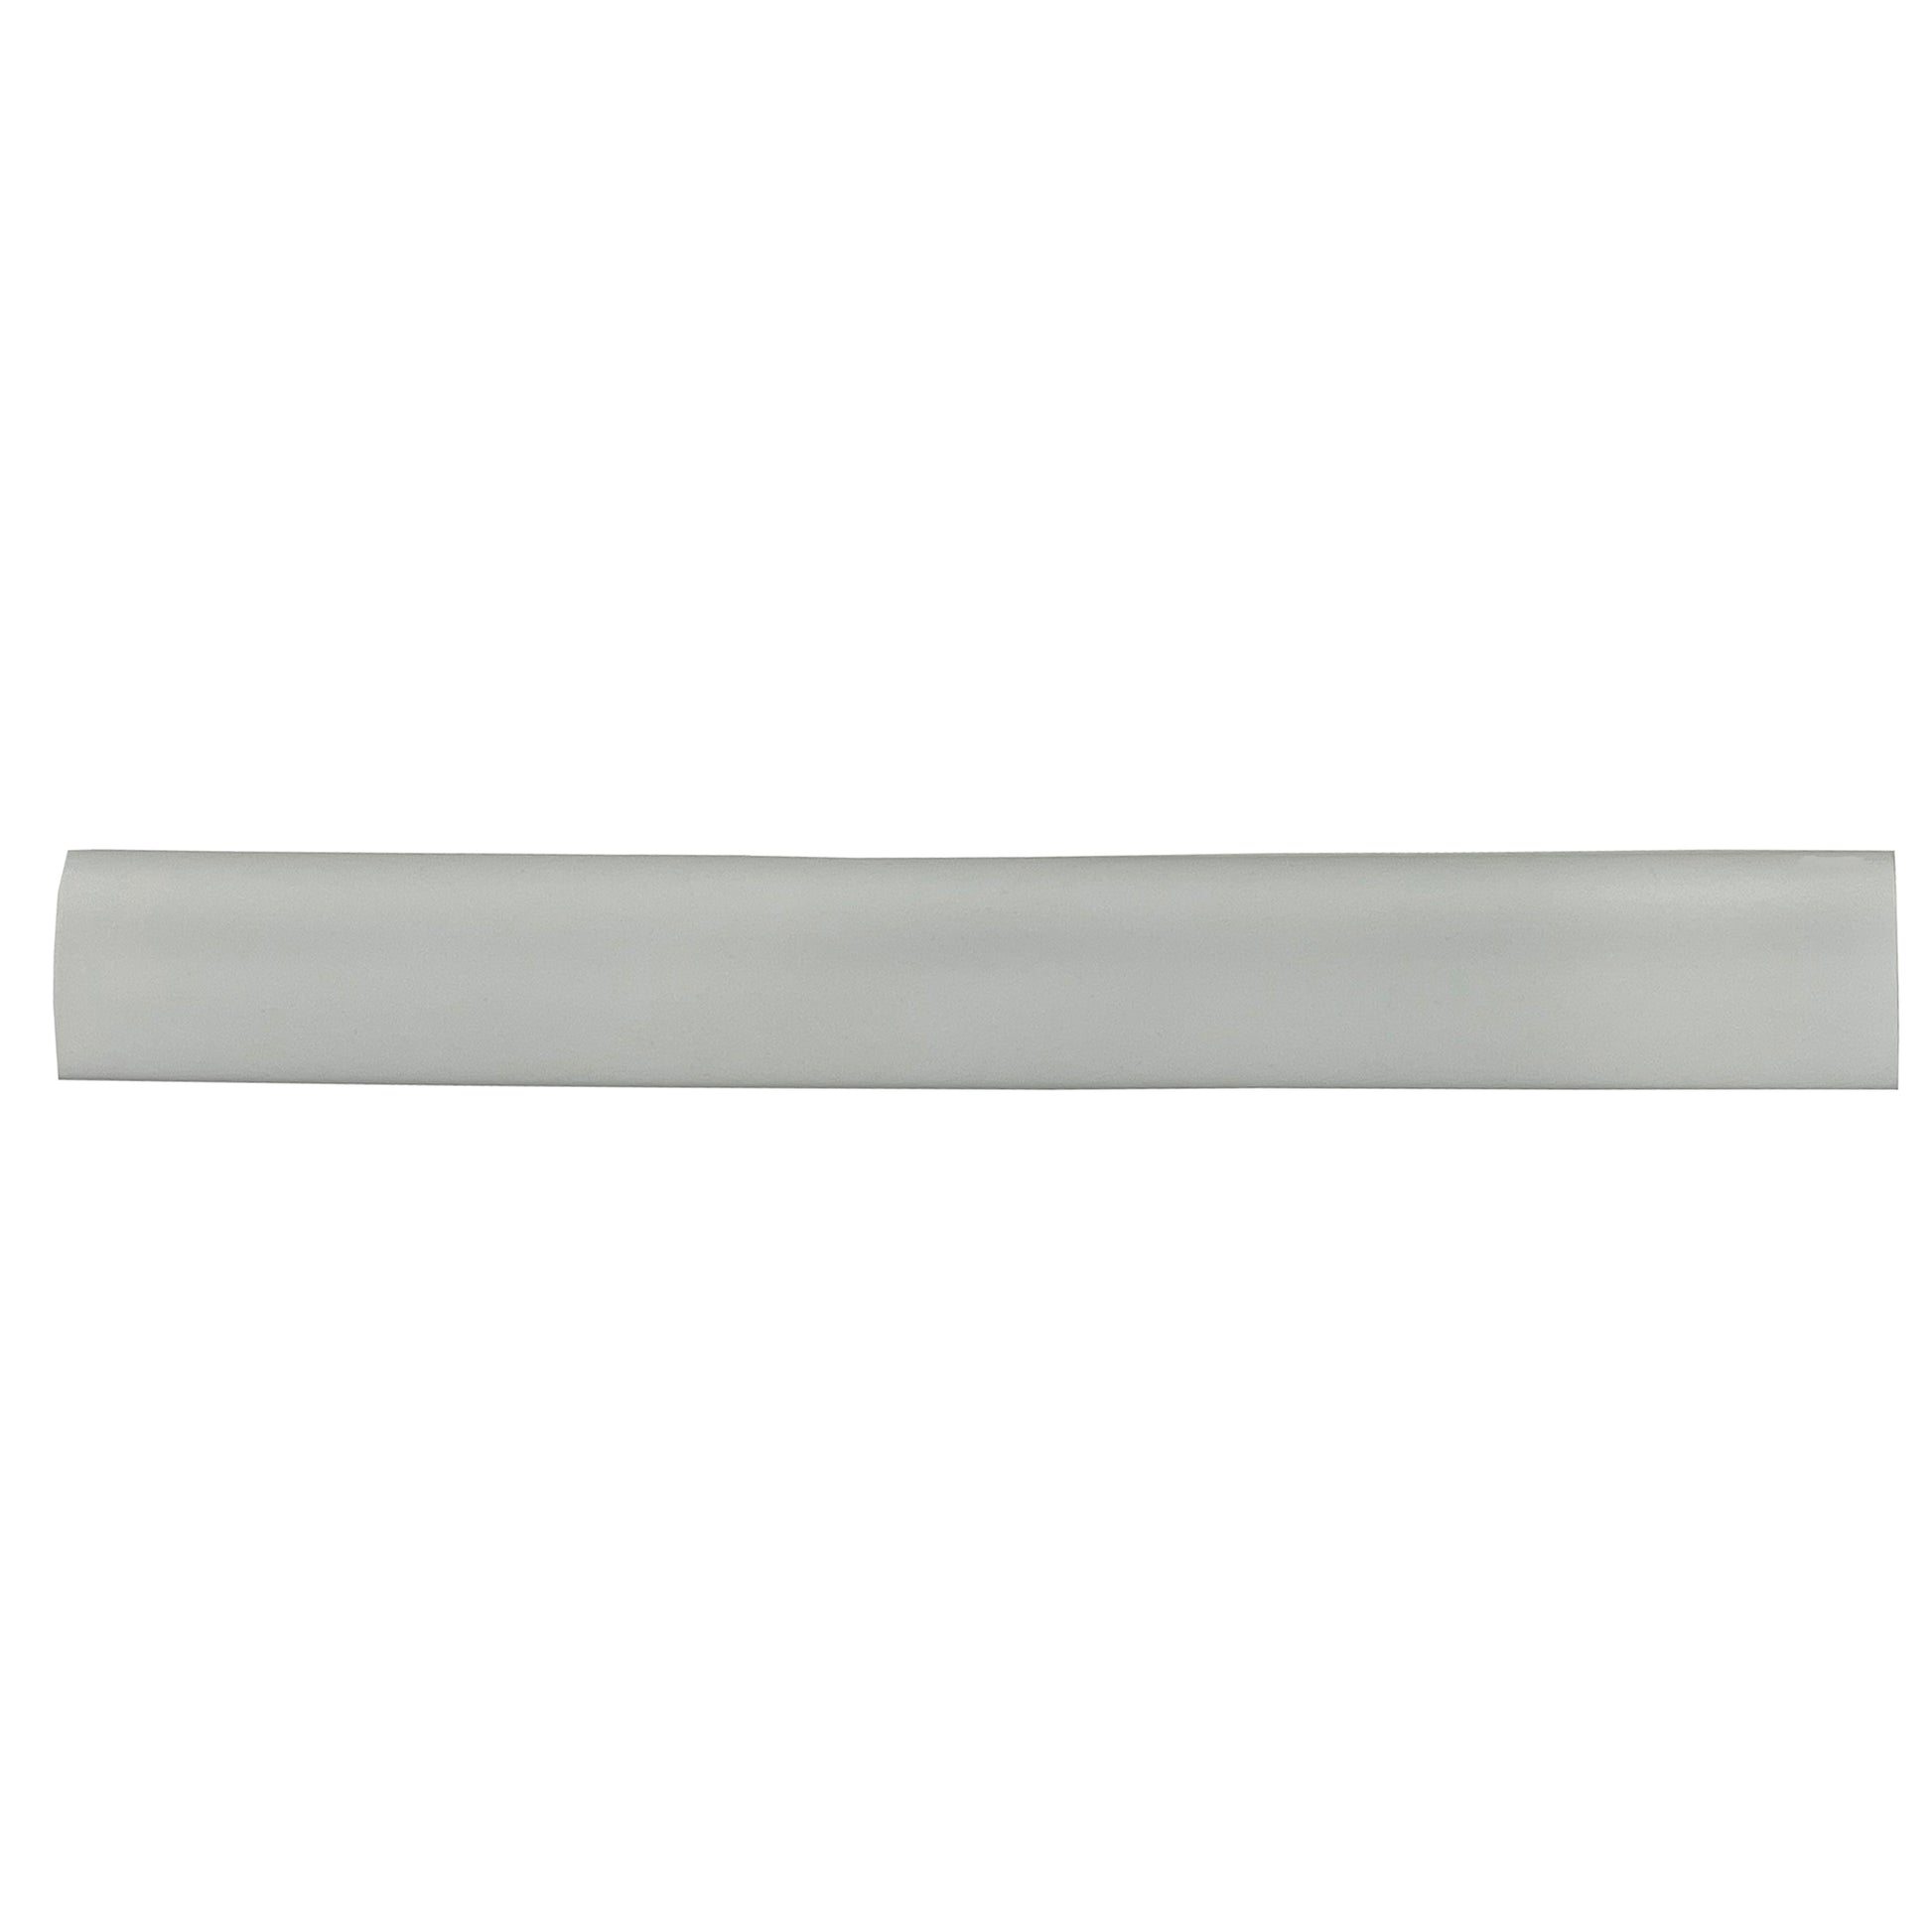 Flexible Thin Single Wall Non-Adhesive Heat Shrink Tubing 2:1 White 1/2" ID - 48" Inch 4 Pack